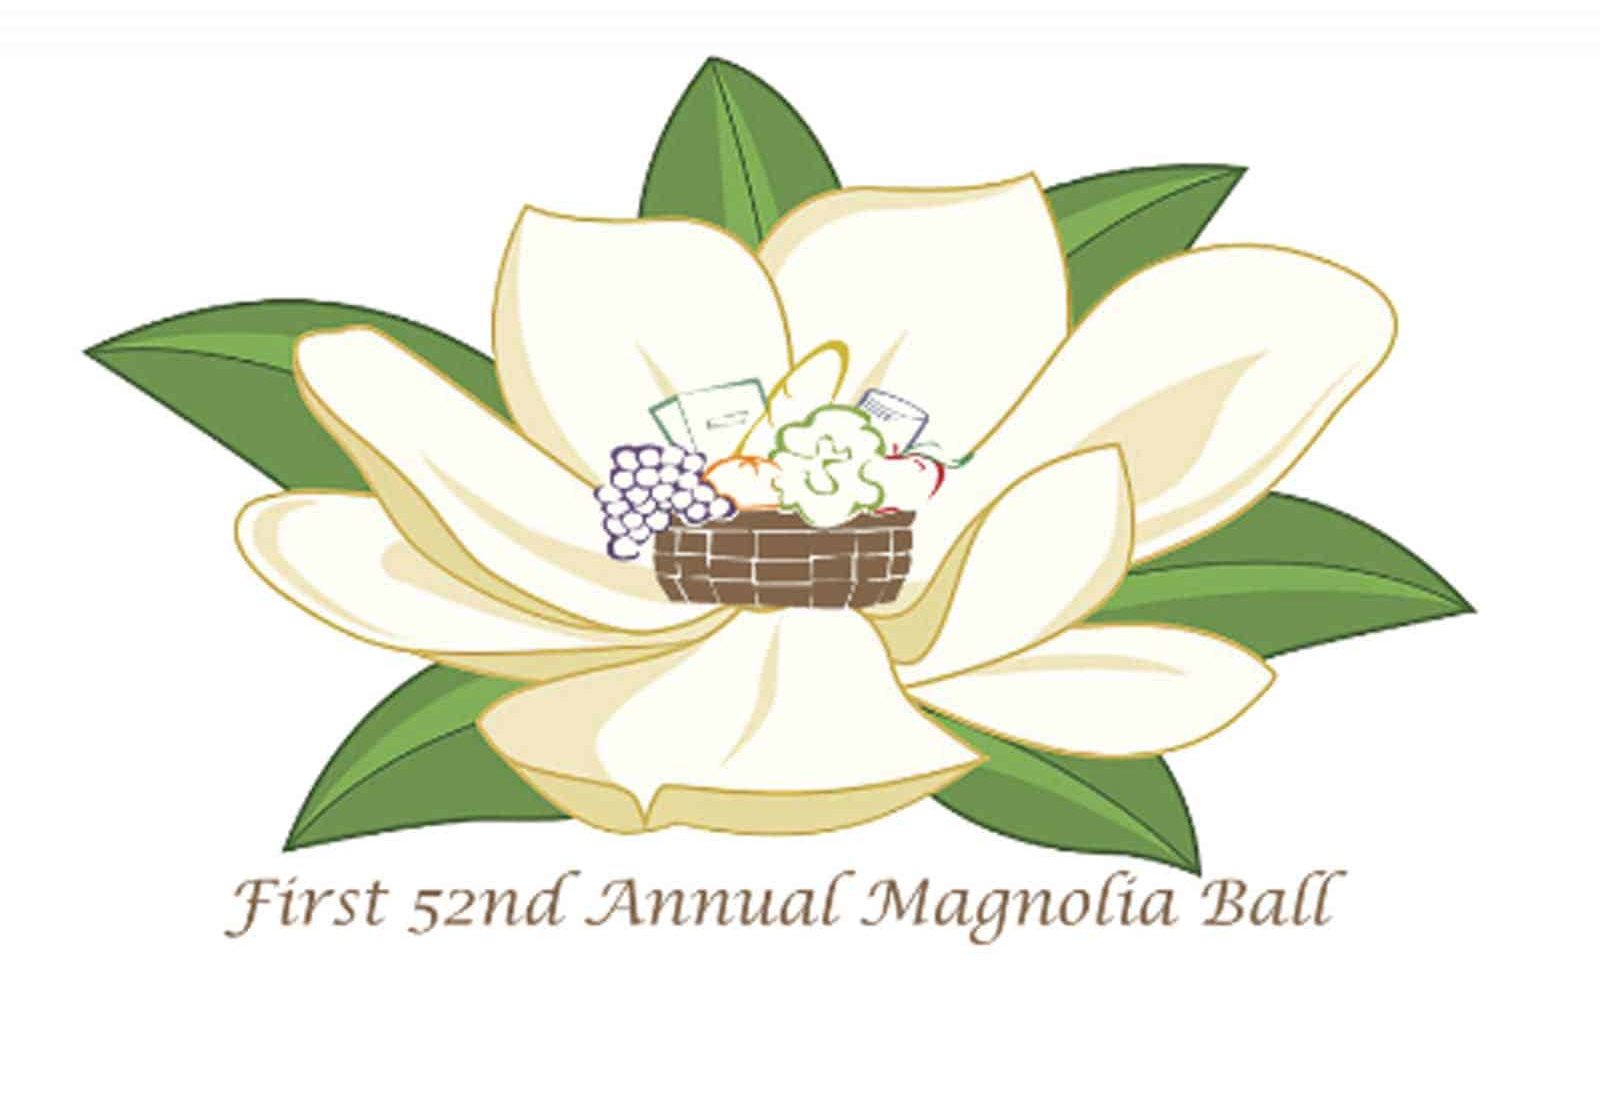 Prodisee Pantry Hosting Magnolia Ball In January